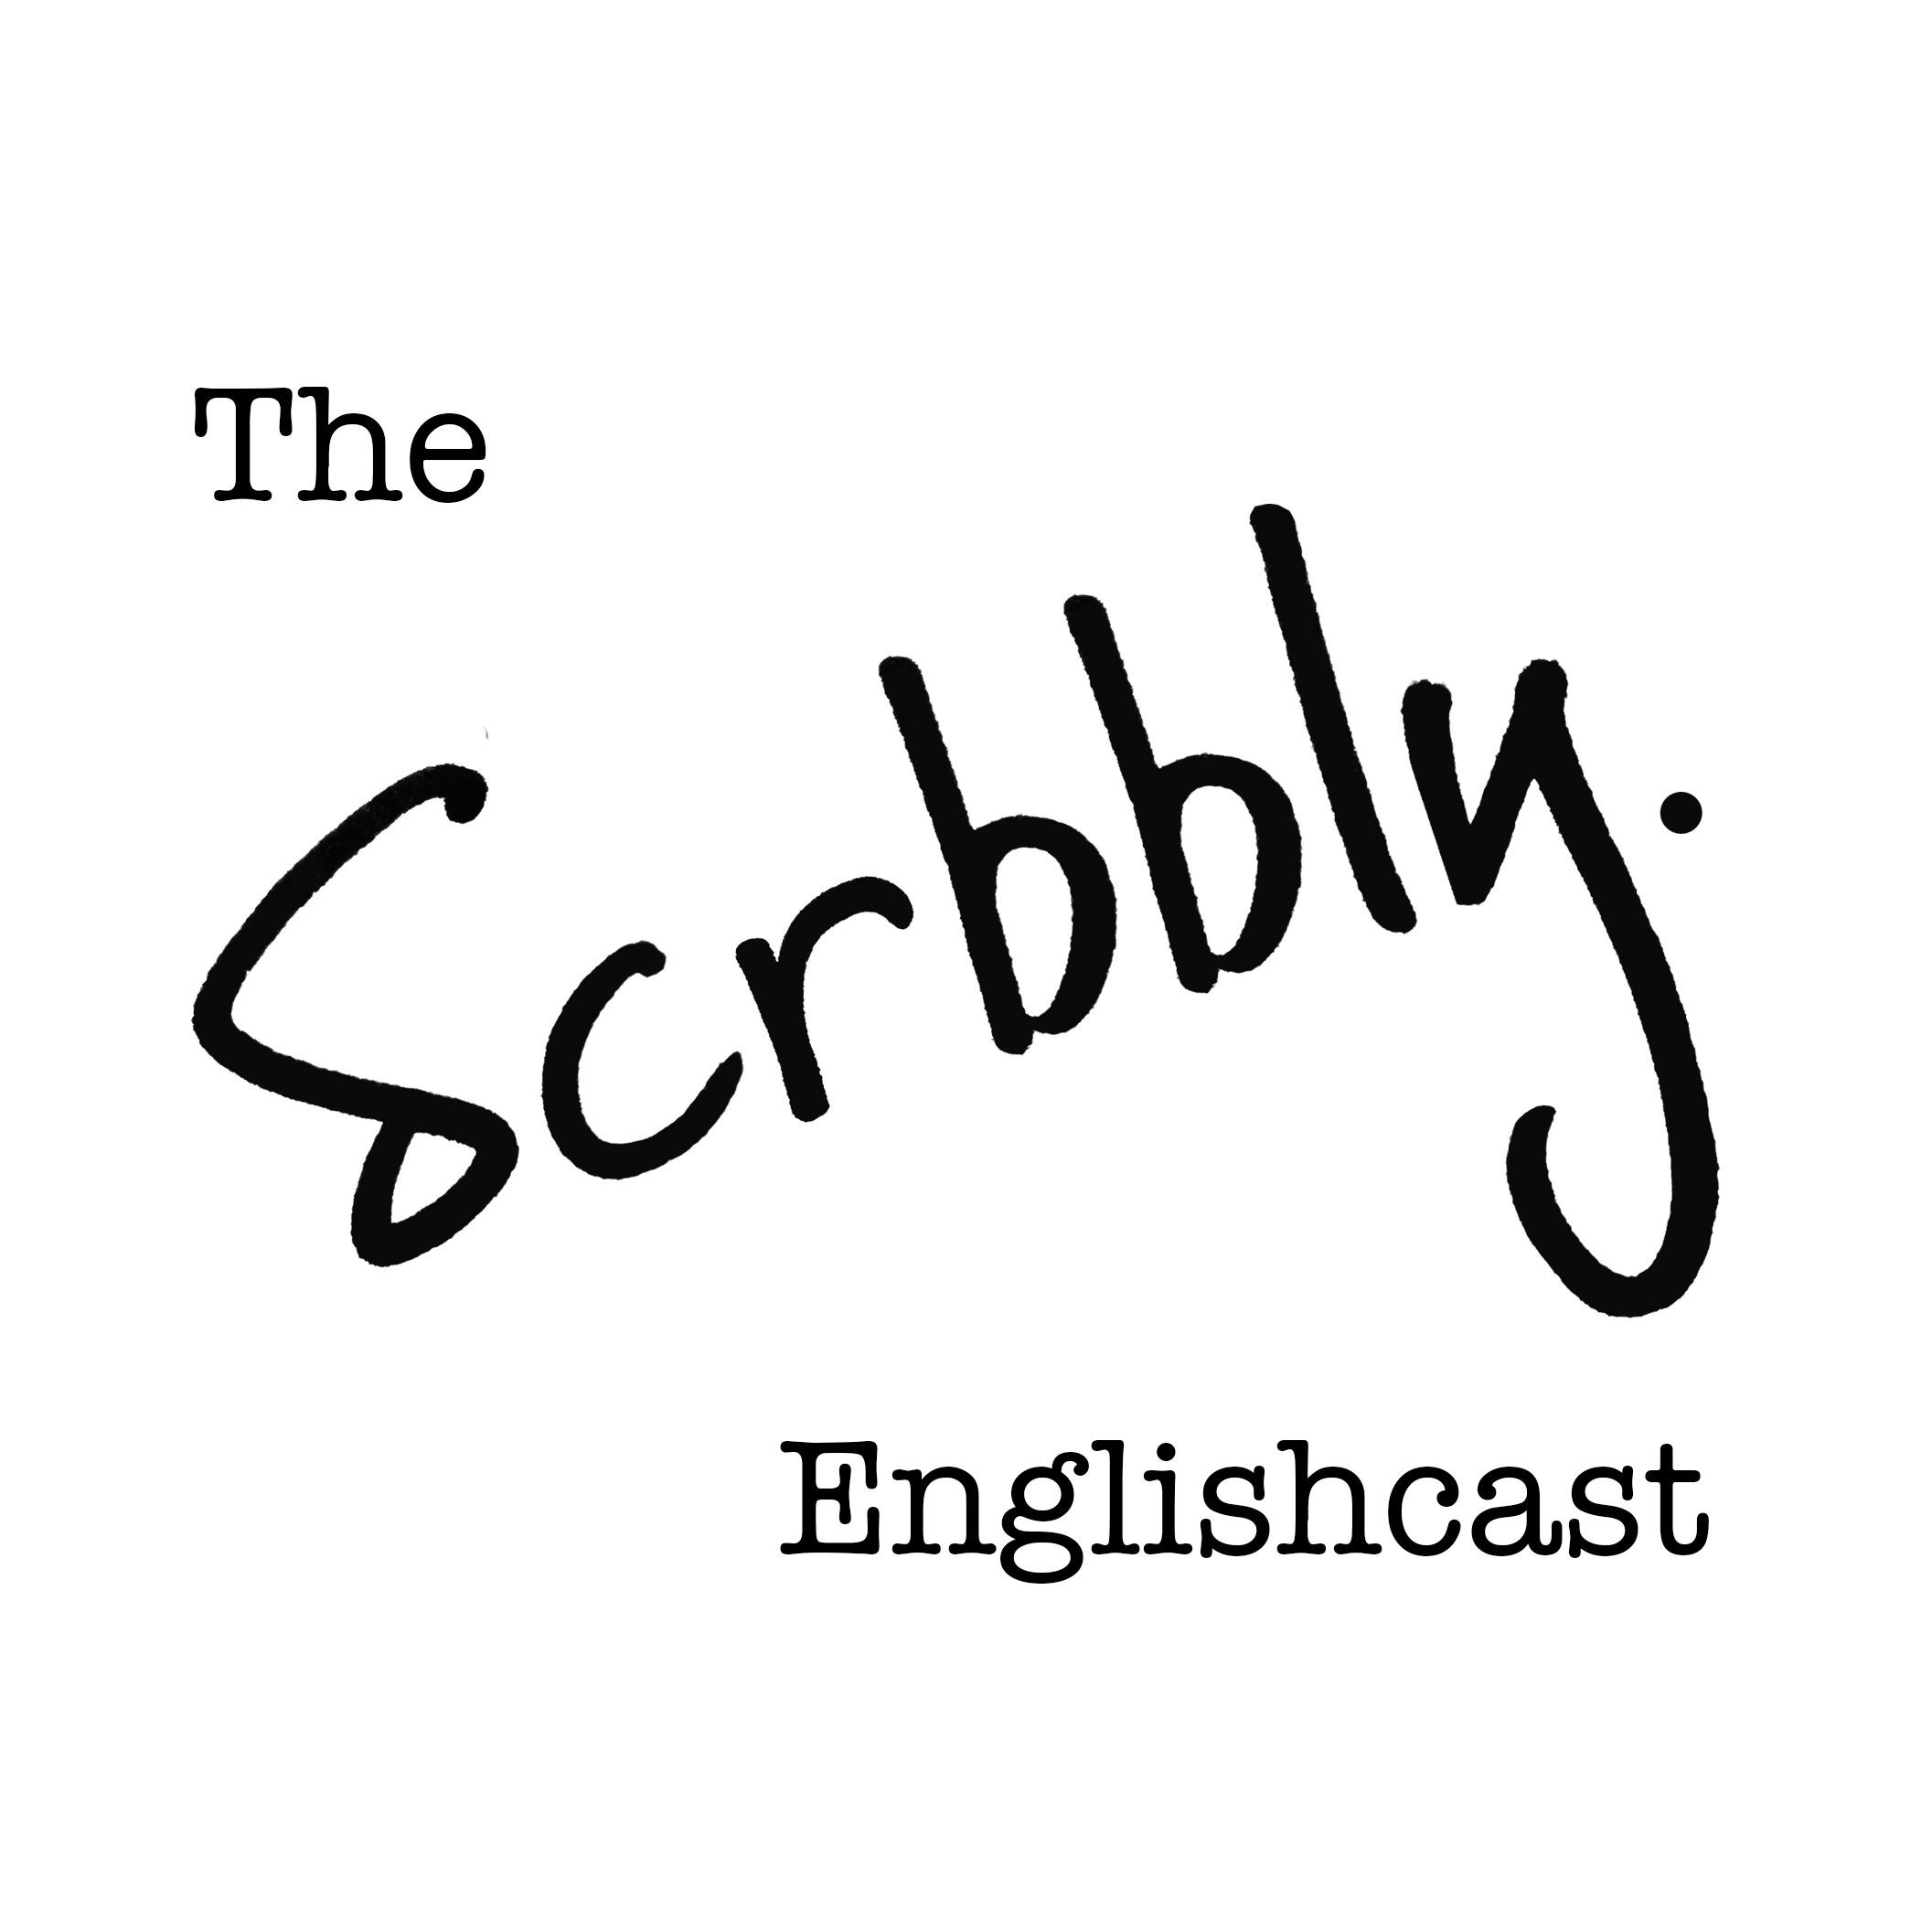 The Scrbbly Englishcast